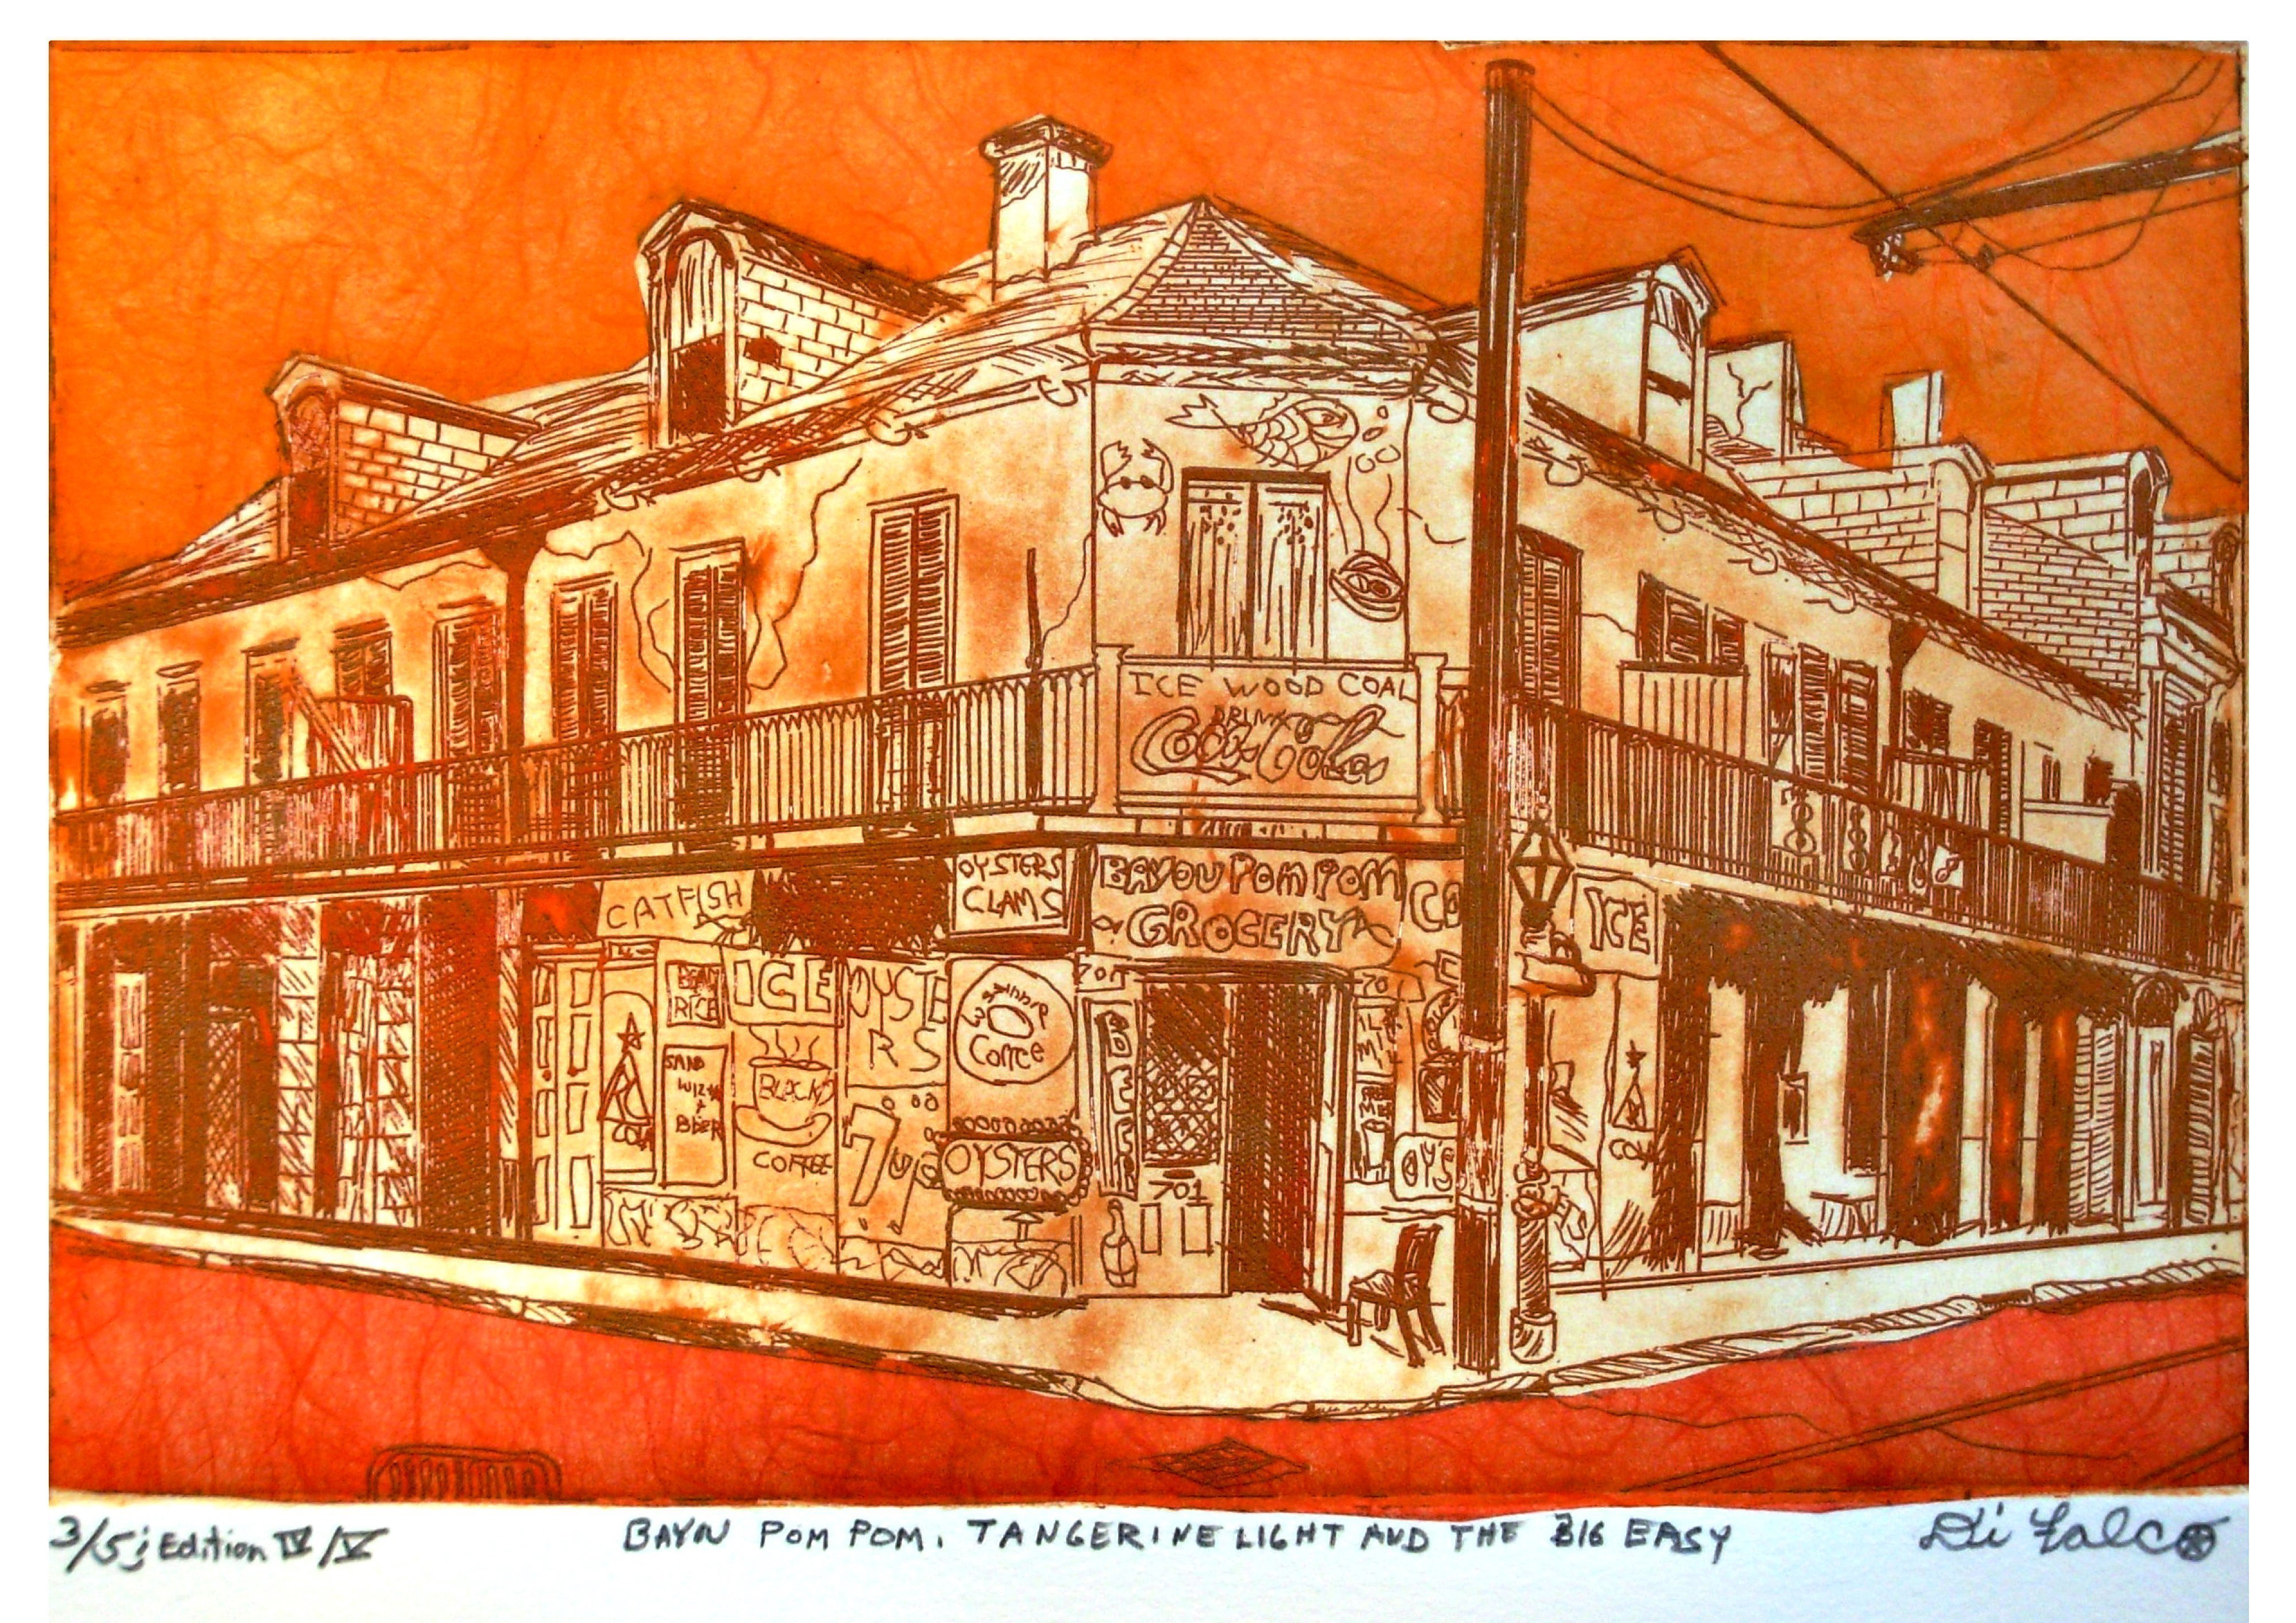 Jerry  Di Falco: 'Bayou Pom Pom and Tangerine Light and The Big Easy', 2016 Etching, Cityscape. Shipment not included in price. One zinc plate was used for this etching, which measured 6 inches high by 9 inches wide The print measures 11. 2 inches high by 15 inches wide. Media used was Stonehenge cream colored paper, oil based etching ink, mulberry bark paper, and methyl cellulose. ...